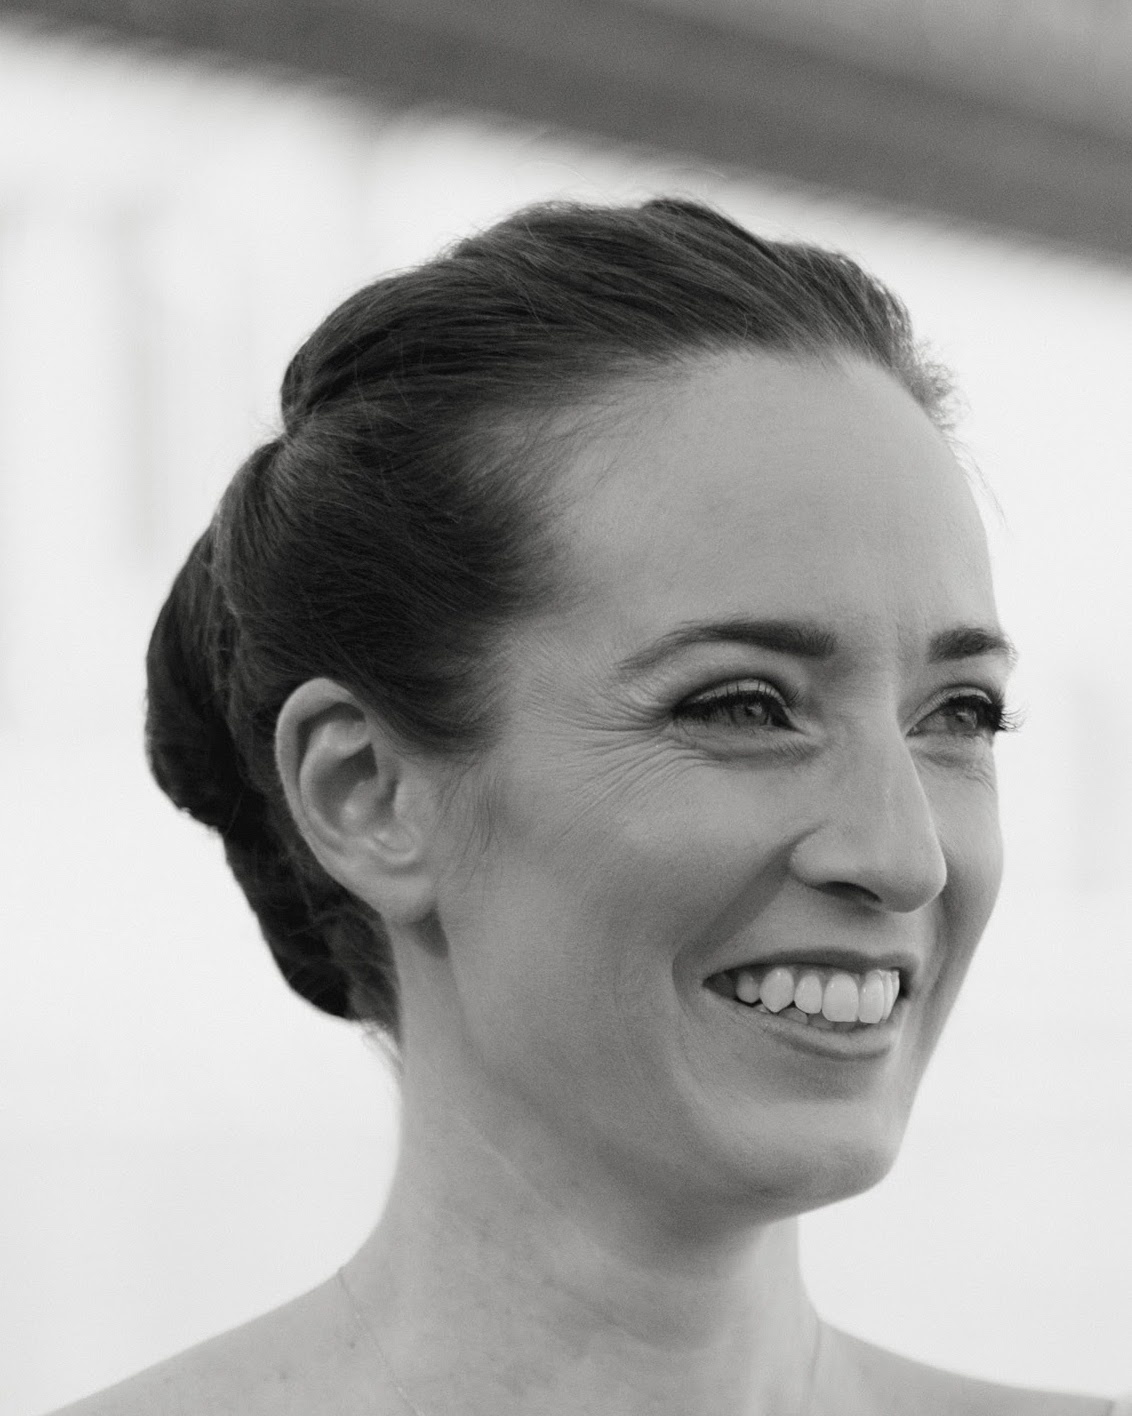 A portrait of dancer Julie McMillan Castellano, who smiles with her eyes squinting and her lips open revealing the top row of her teeth. She wears her hair pulled back in a low bun. 